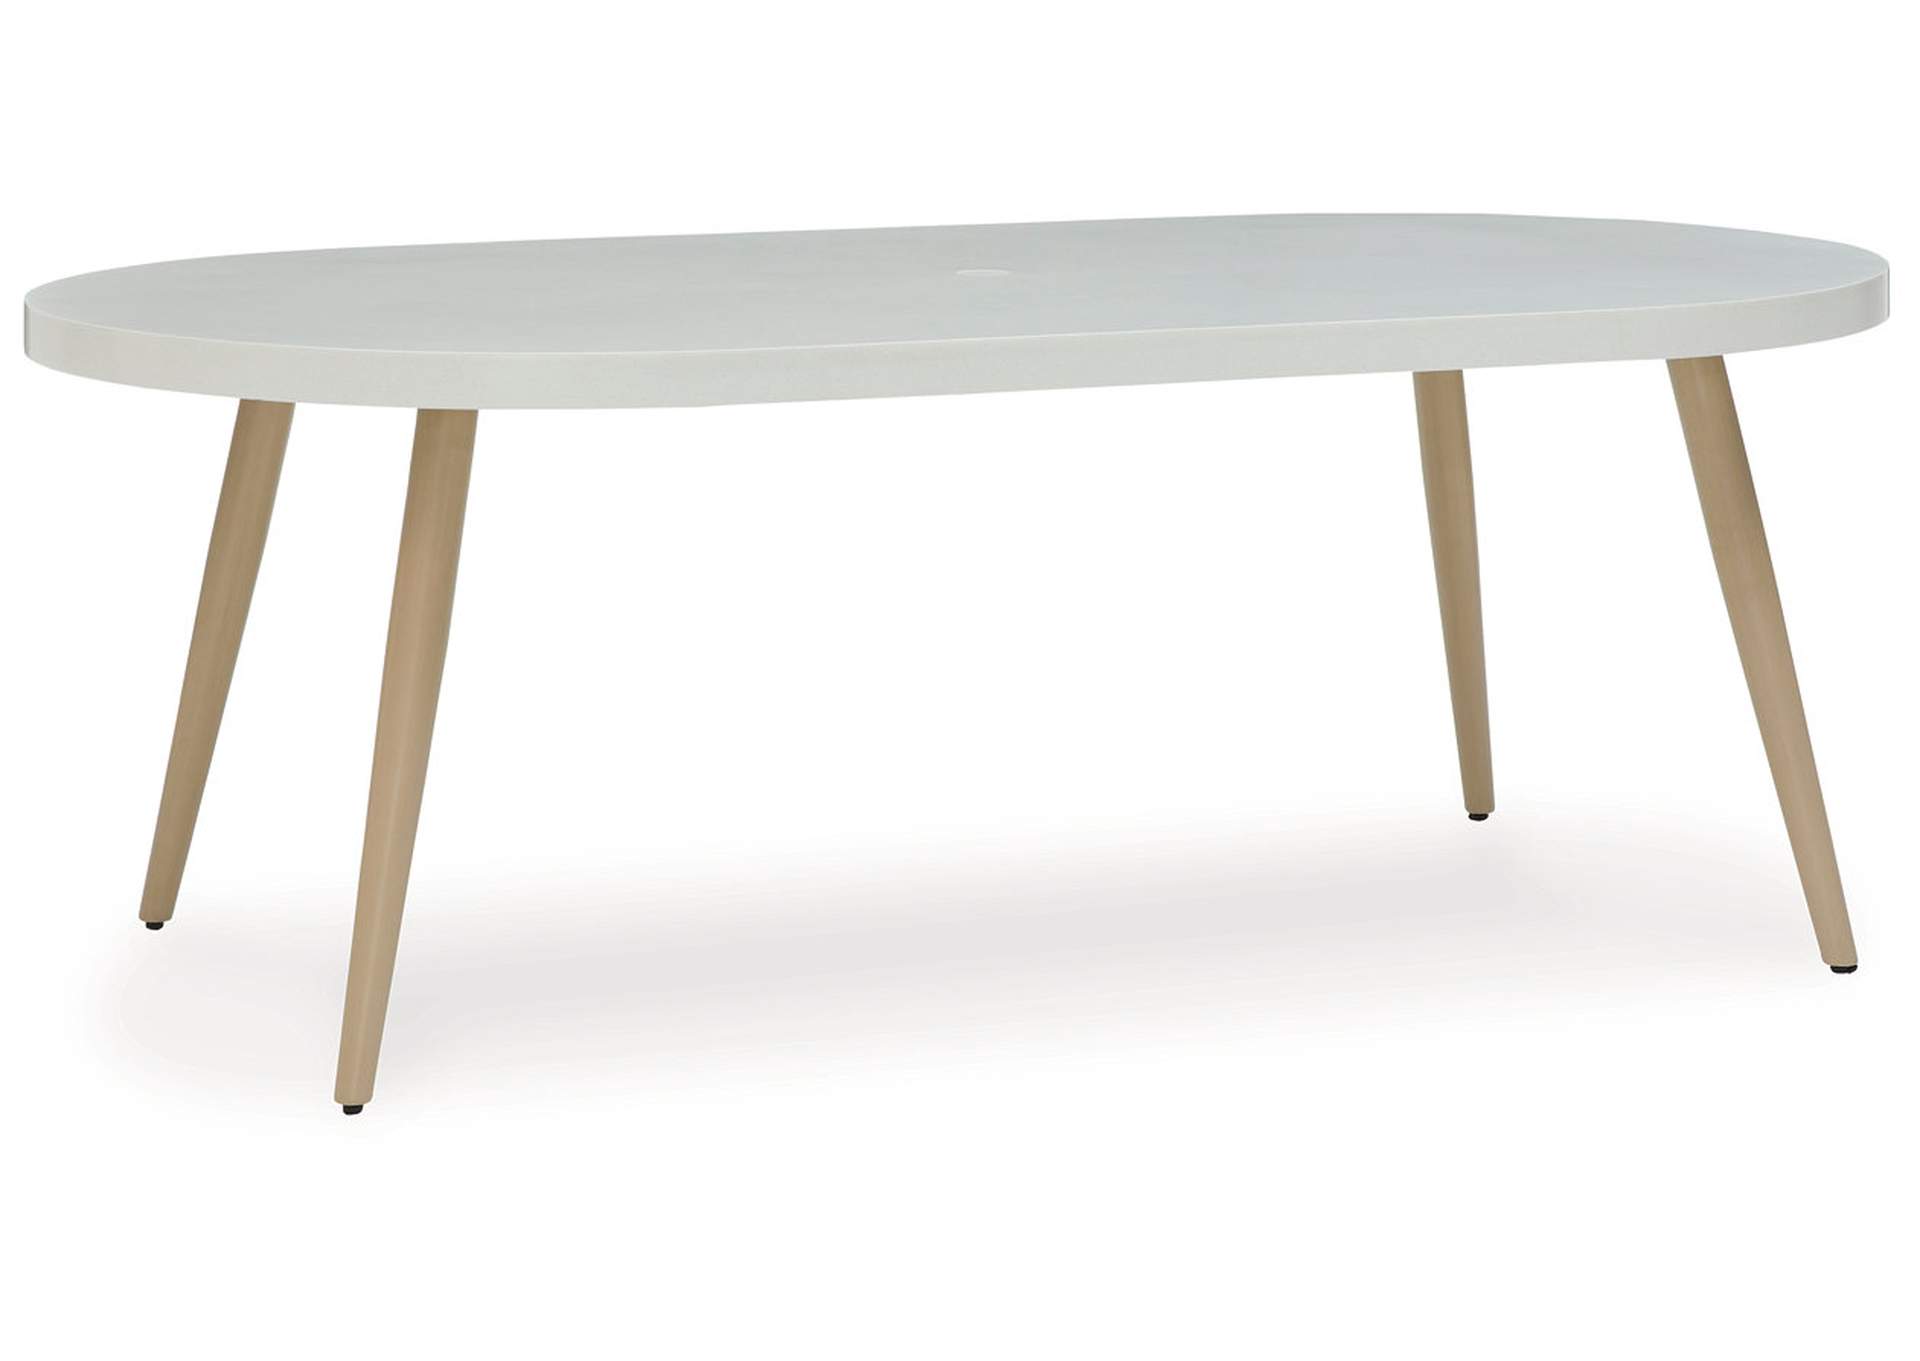 Seton Creek Outdoor Dining Table,Outdoor By Ashley